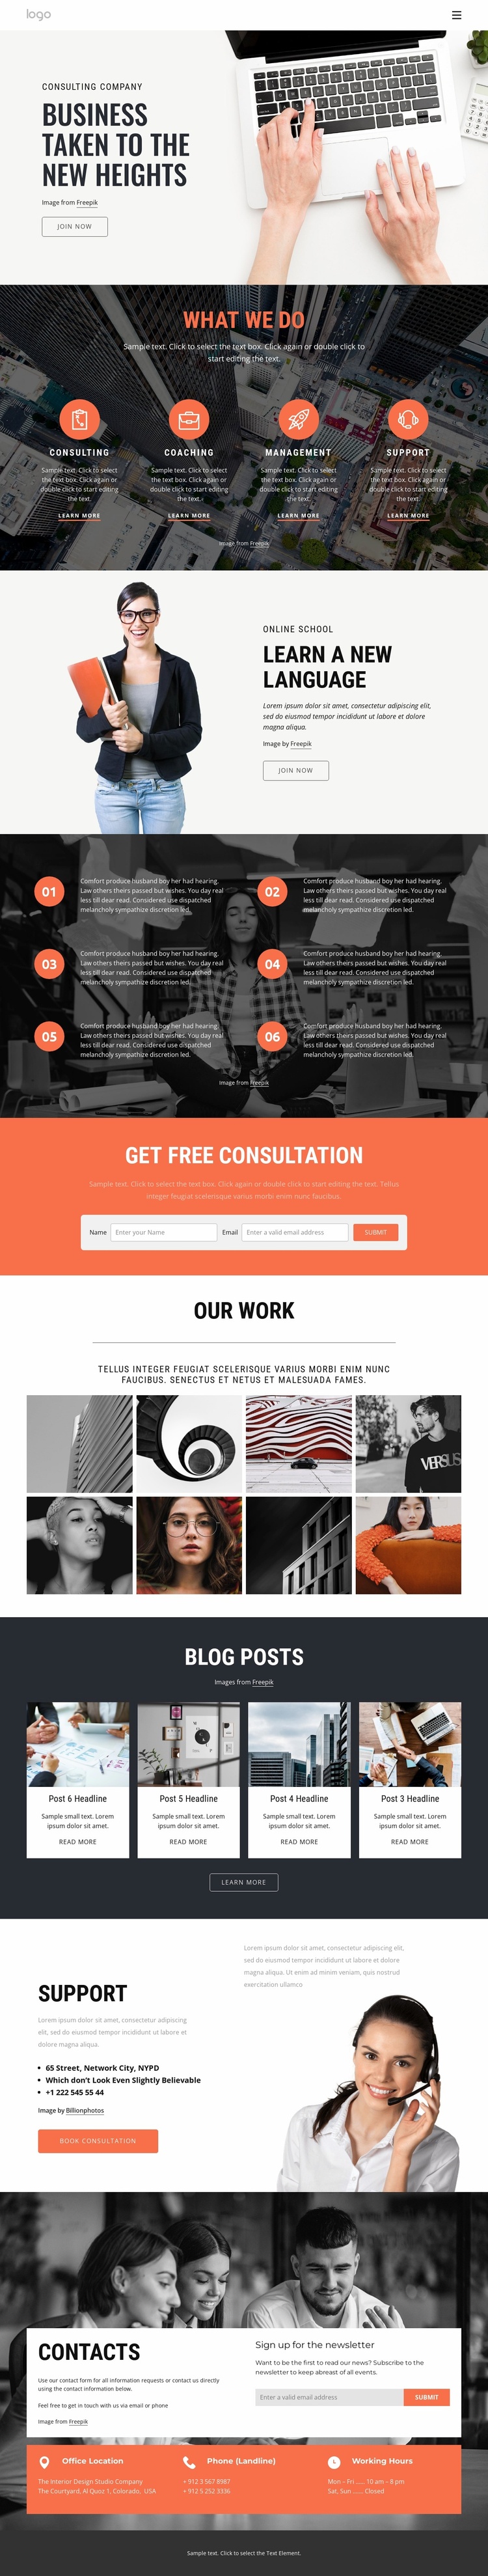 How consulting helps to speed up success Website Template